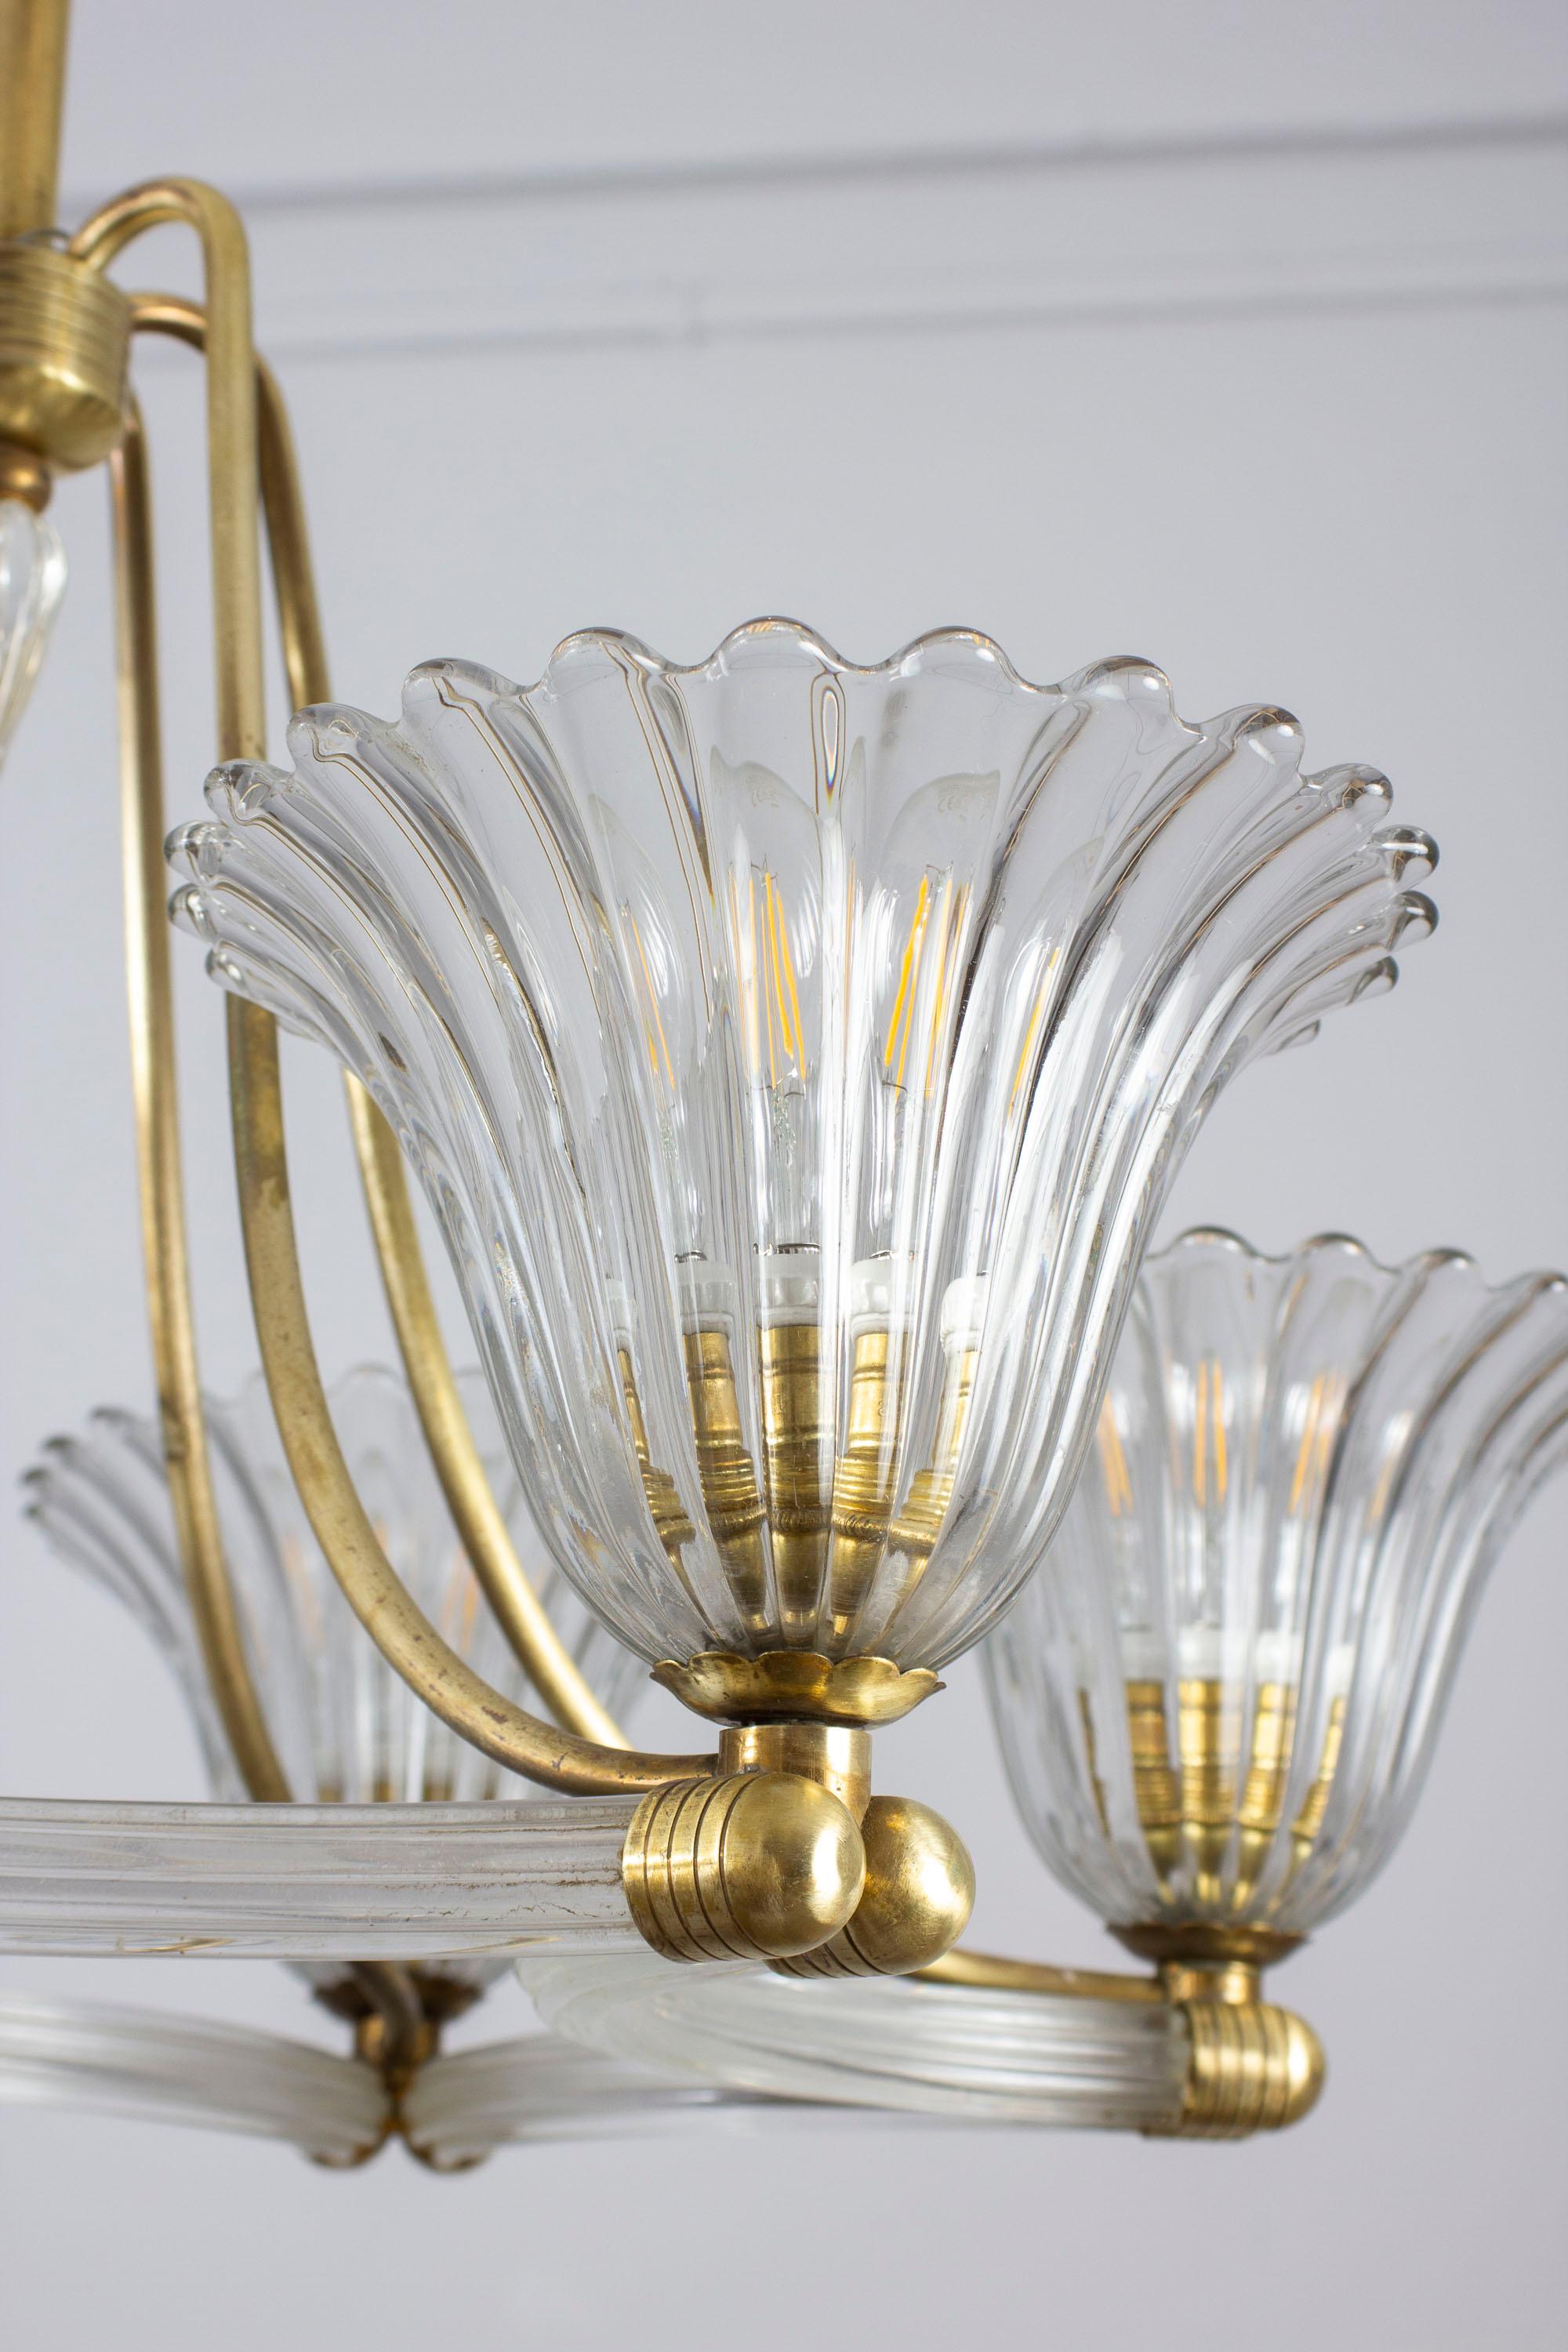  Art Deco Brass Mounted Murano Glass Chandelier by Ercole Barovier 1940 For Sale 1